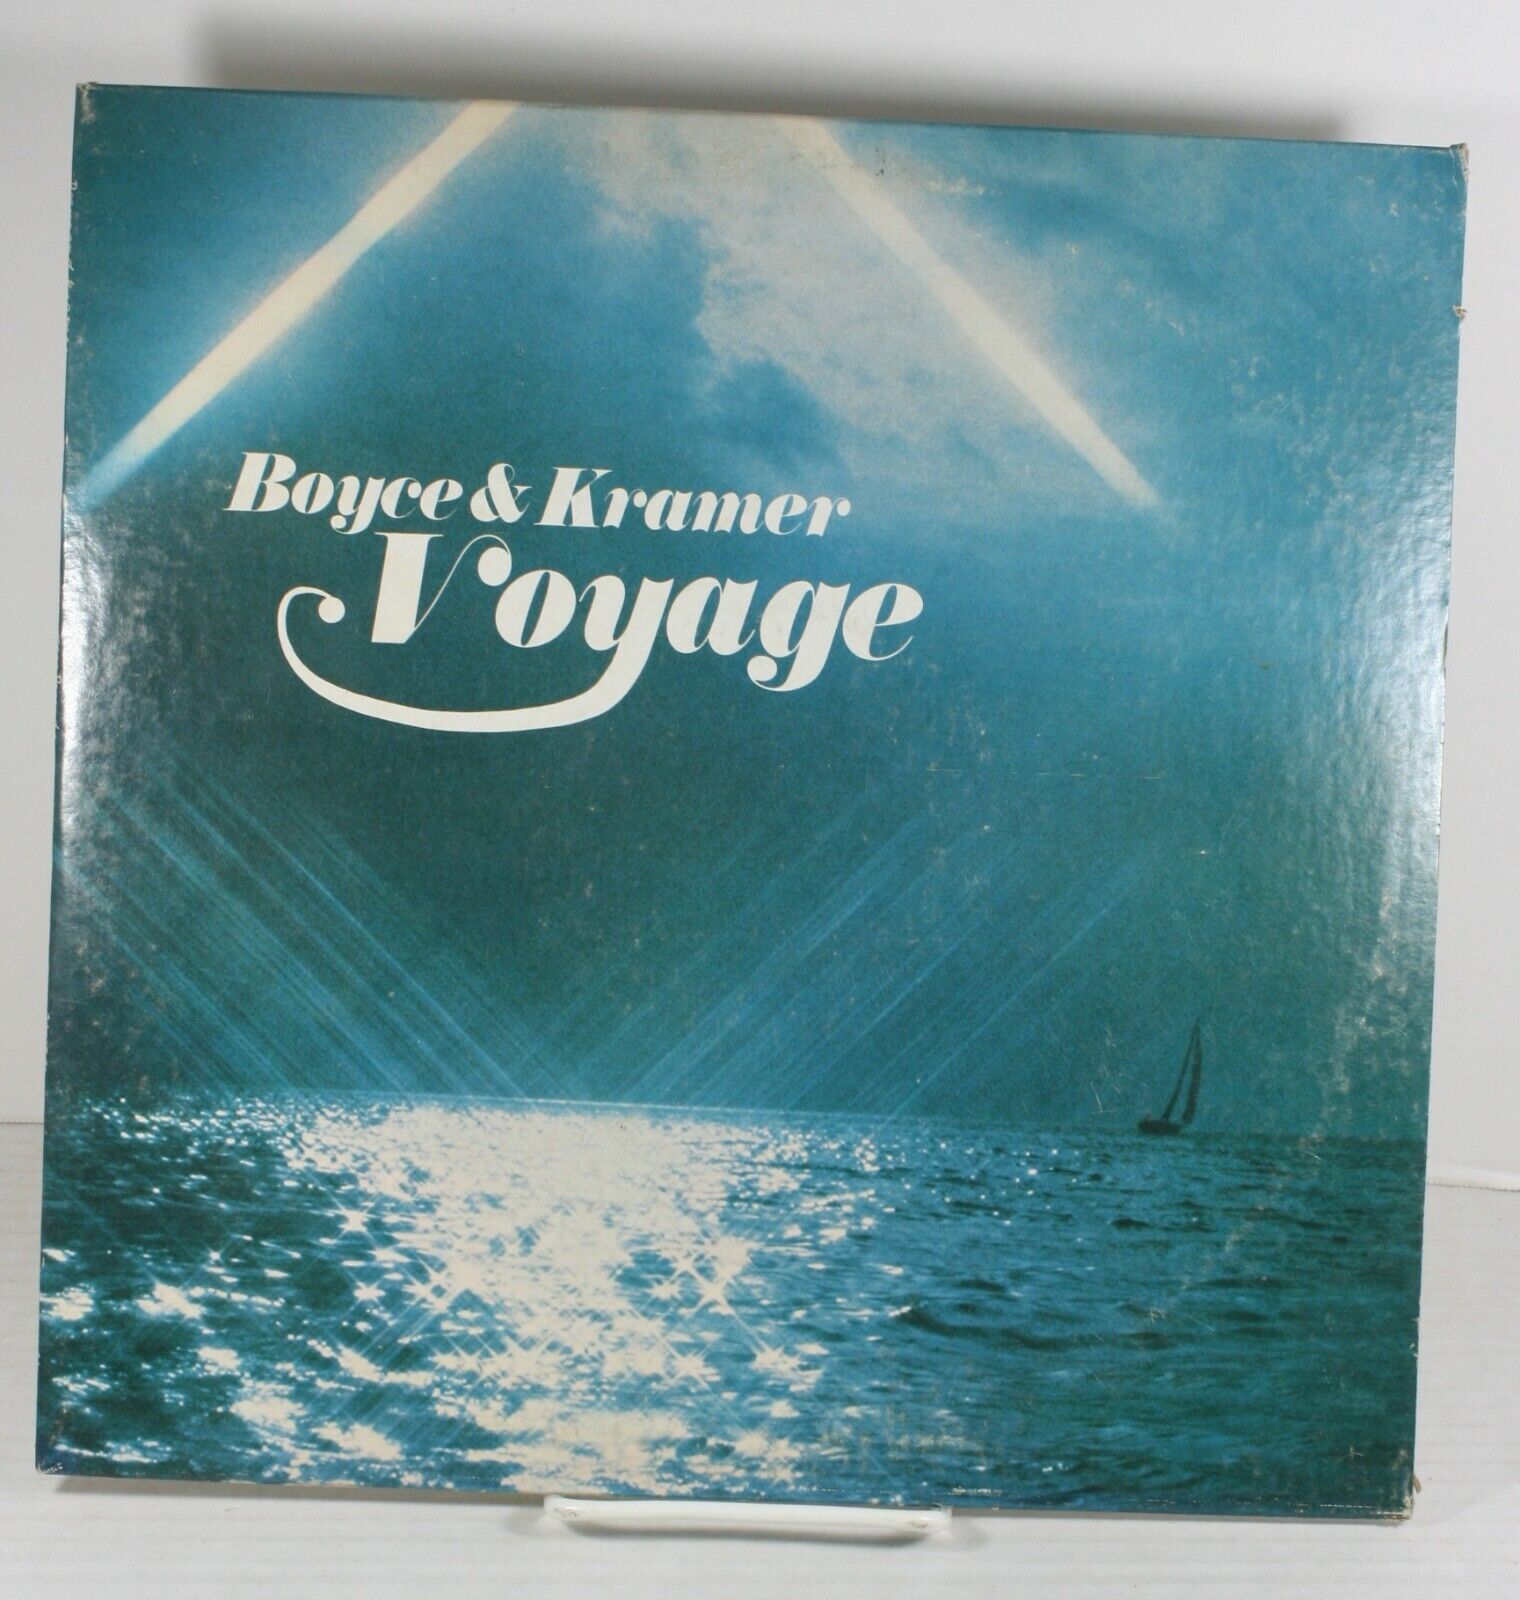 Boyce and Kramer Voyage LP Record 1978 Country Rock Frog Records SIGNED BY BOTH